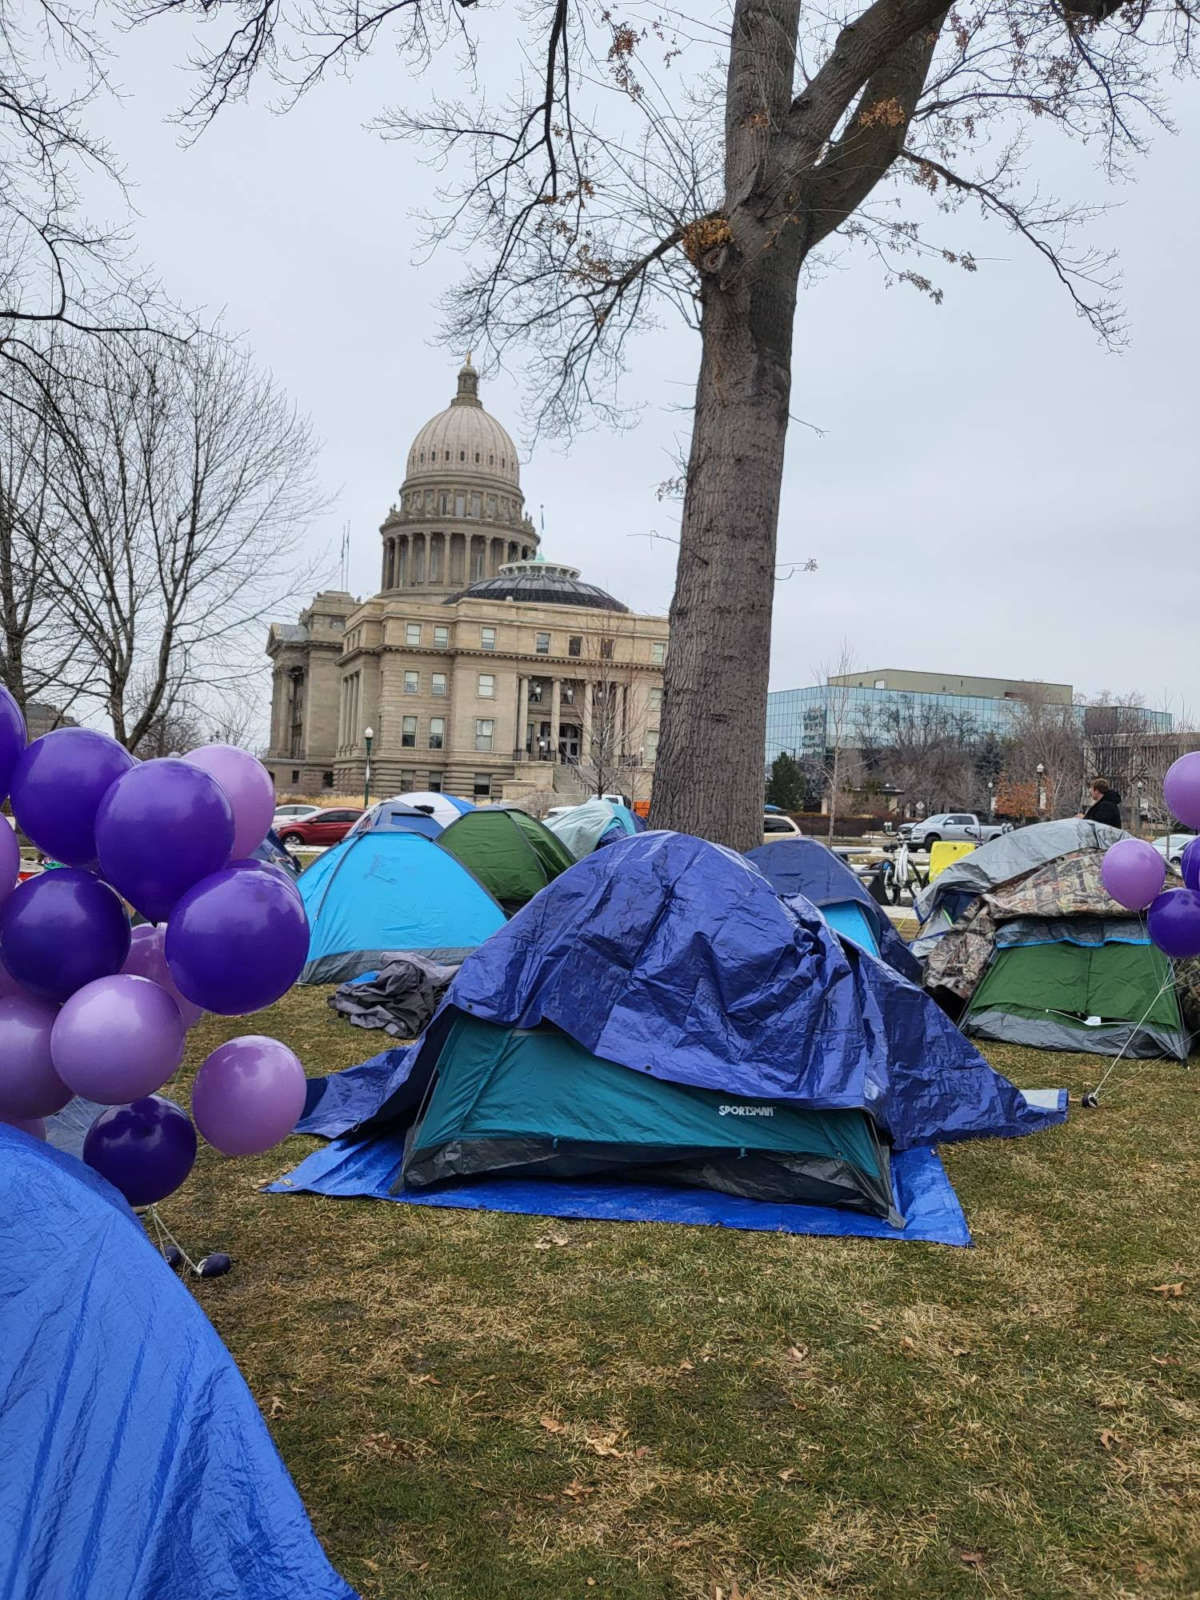 Organizers and members of the unhoused have occupied the State Capitol Mall in Boise, Idaho, for several weeks, in defiance of state police and far right counterprotests.